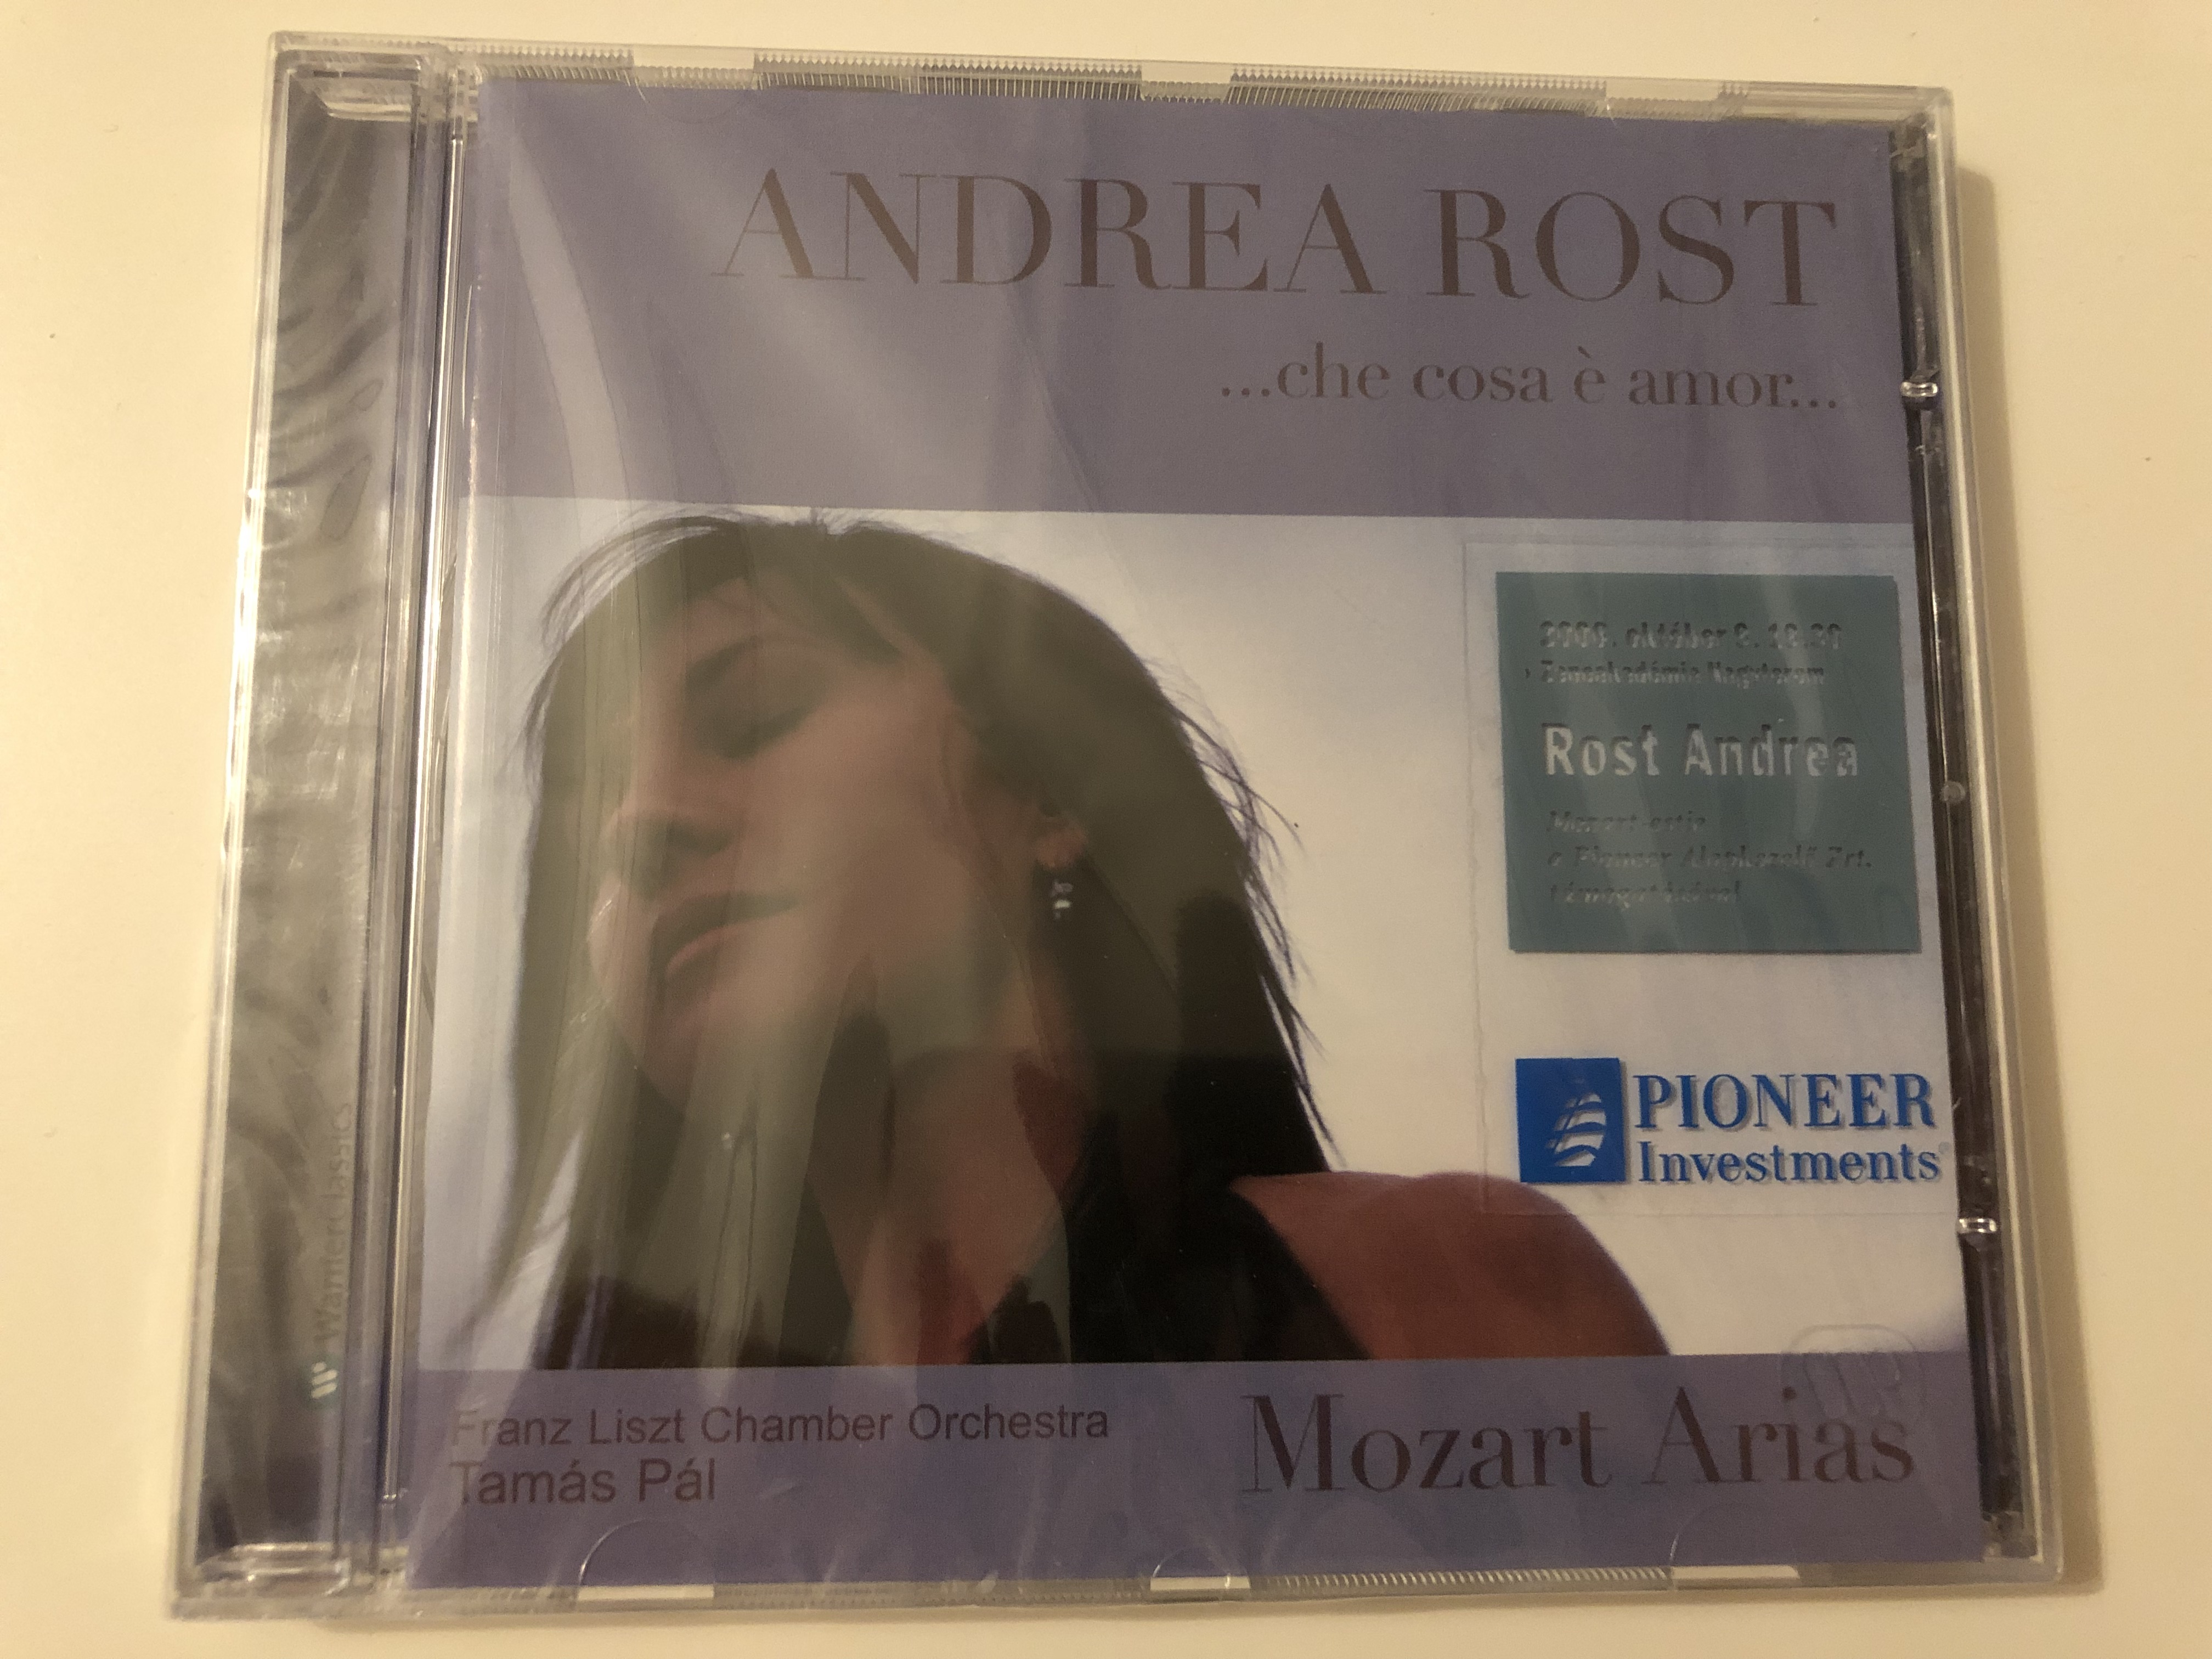 andrea-rost-...-che-cosa-amor...-franz-liszt-chamber-orchestra-leader-j-nos-rolla-conducted-by-tam-s-p-l-mozart-arias-audio-cd-2004-warner-classics-1-.jpg